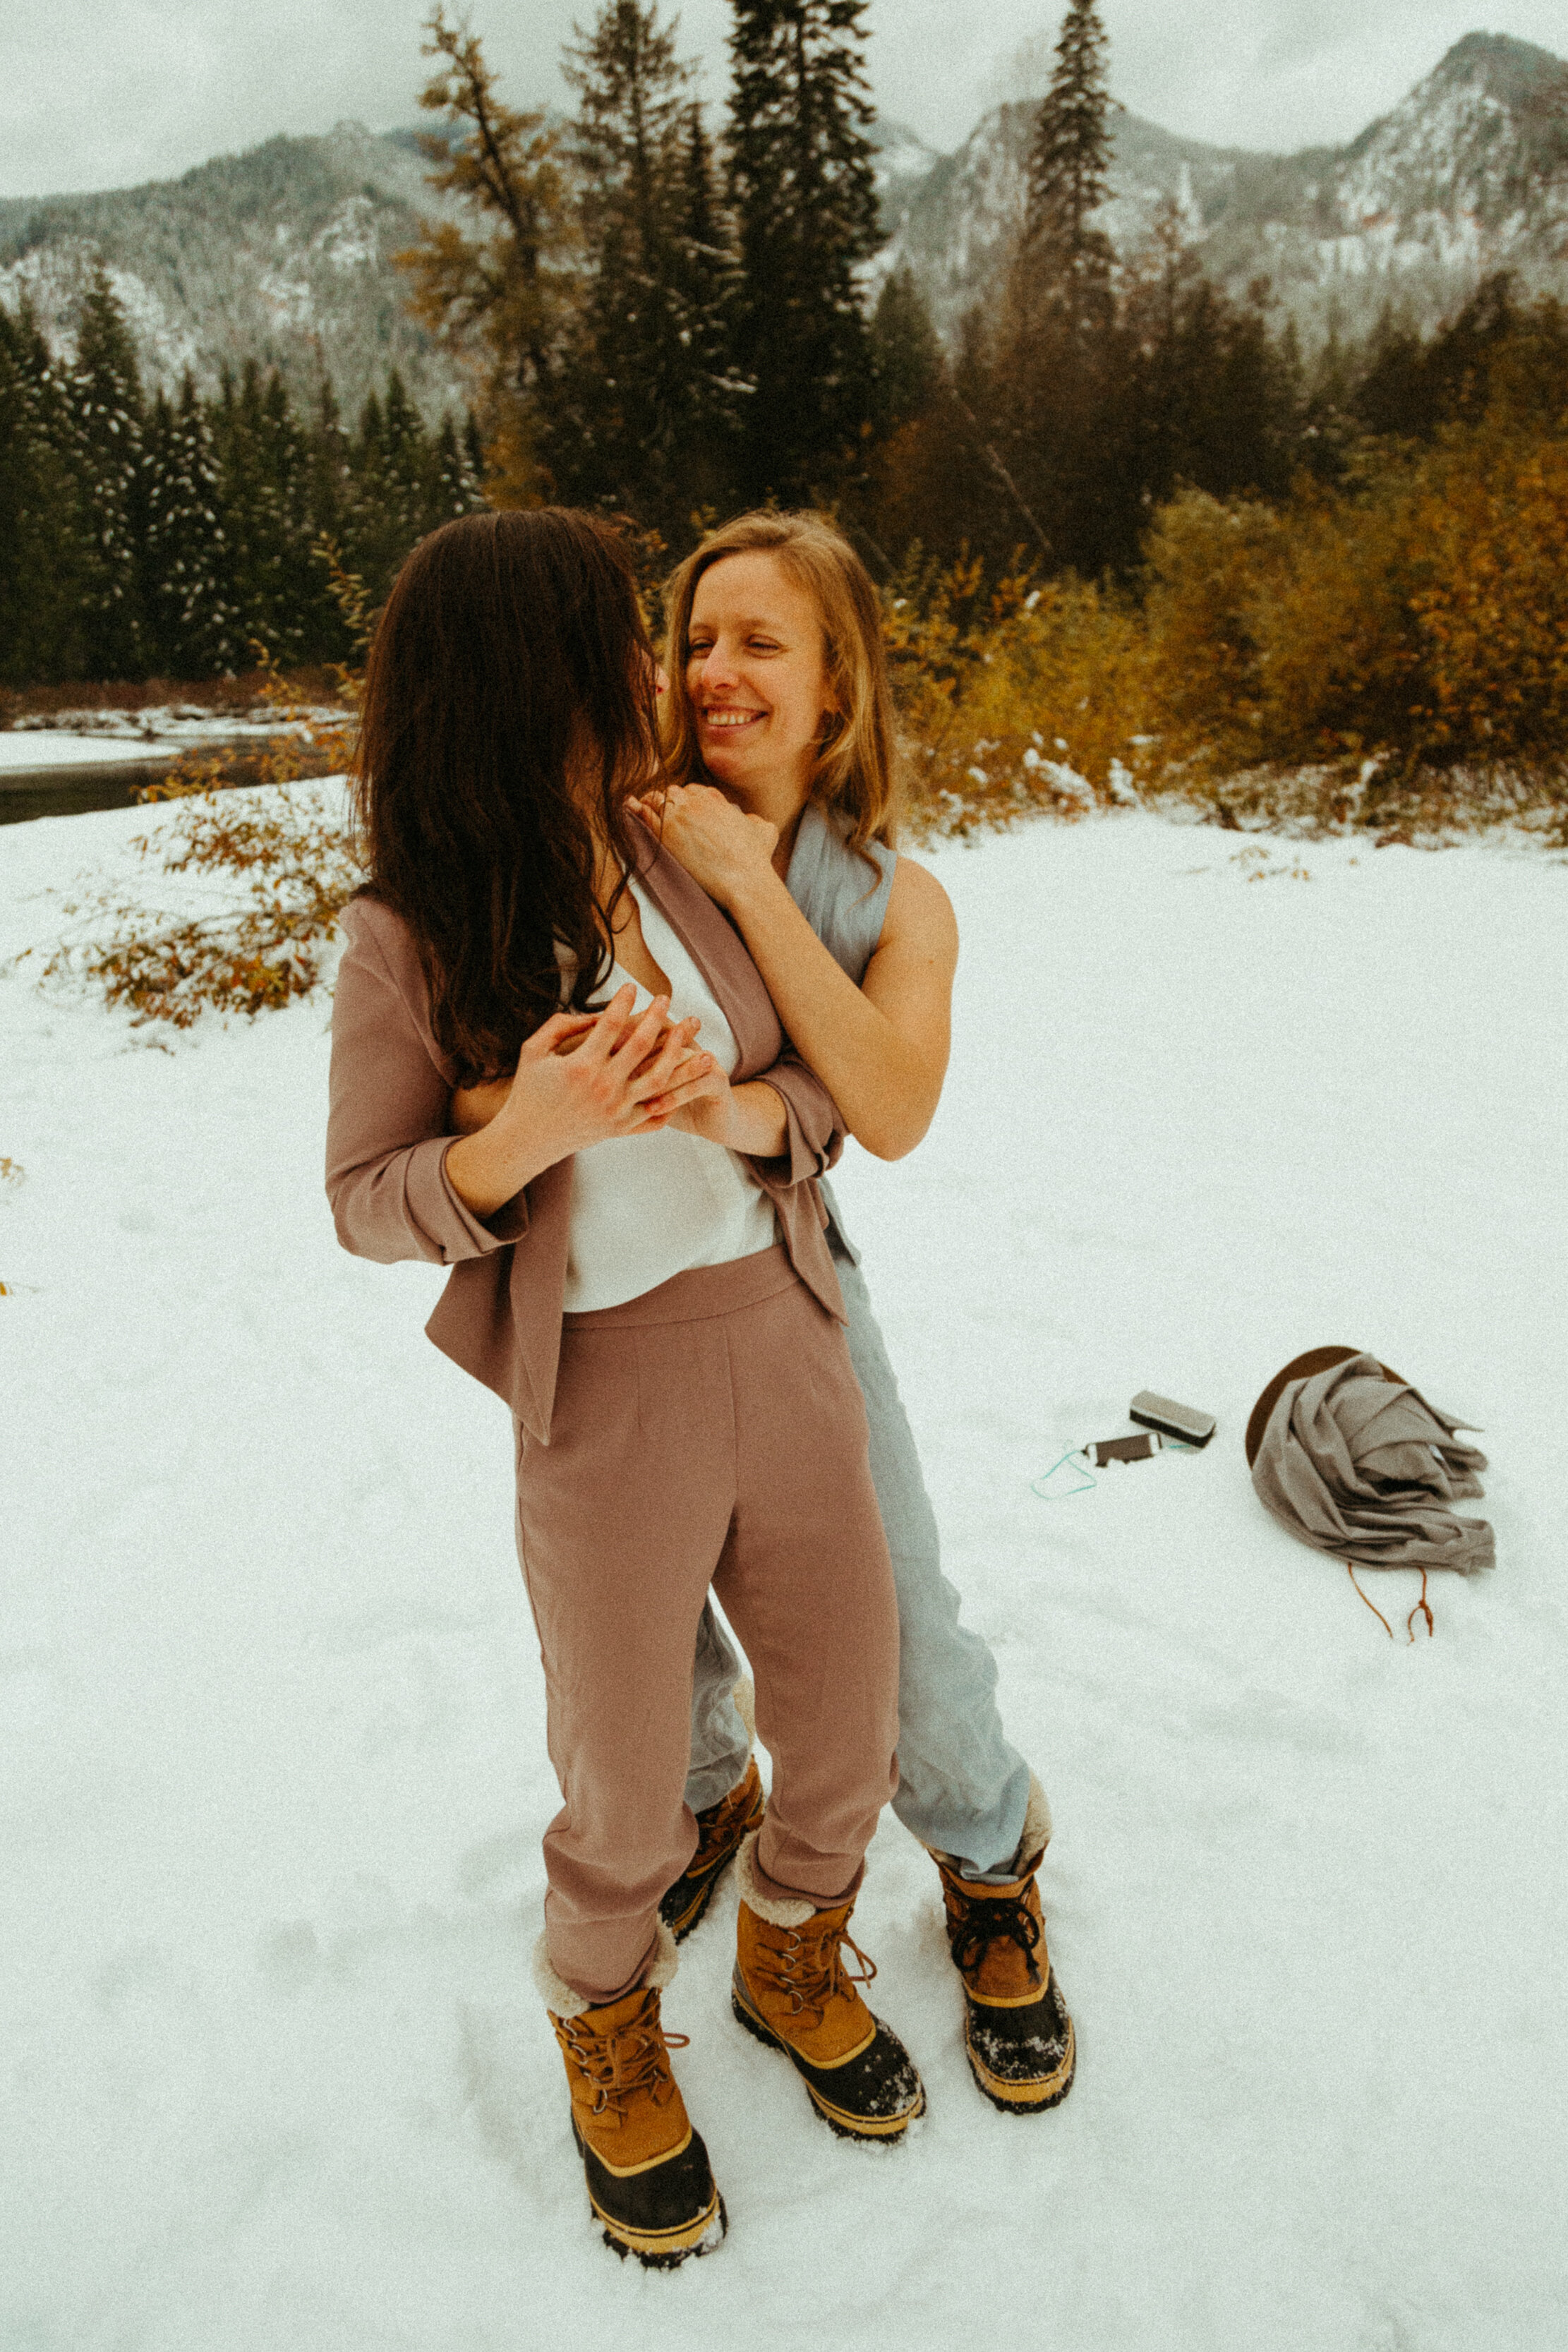 queer-gay-lesbian-trans-affirming-lgbtq-adventure-elopement-intimate-wedding-photographer-pnw-pacific-northwest-pnw-mountain-stream-forest-cowgay-tacoma-seattle-washington-portland-oregon-halle-roland-photography-non-binary-analog-film-artist-165-199.jpg